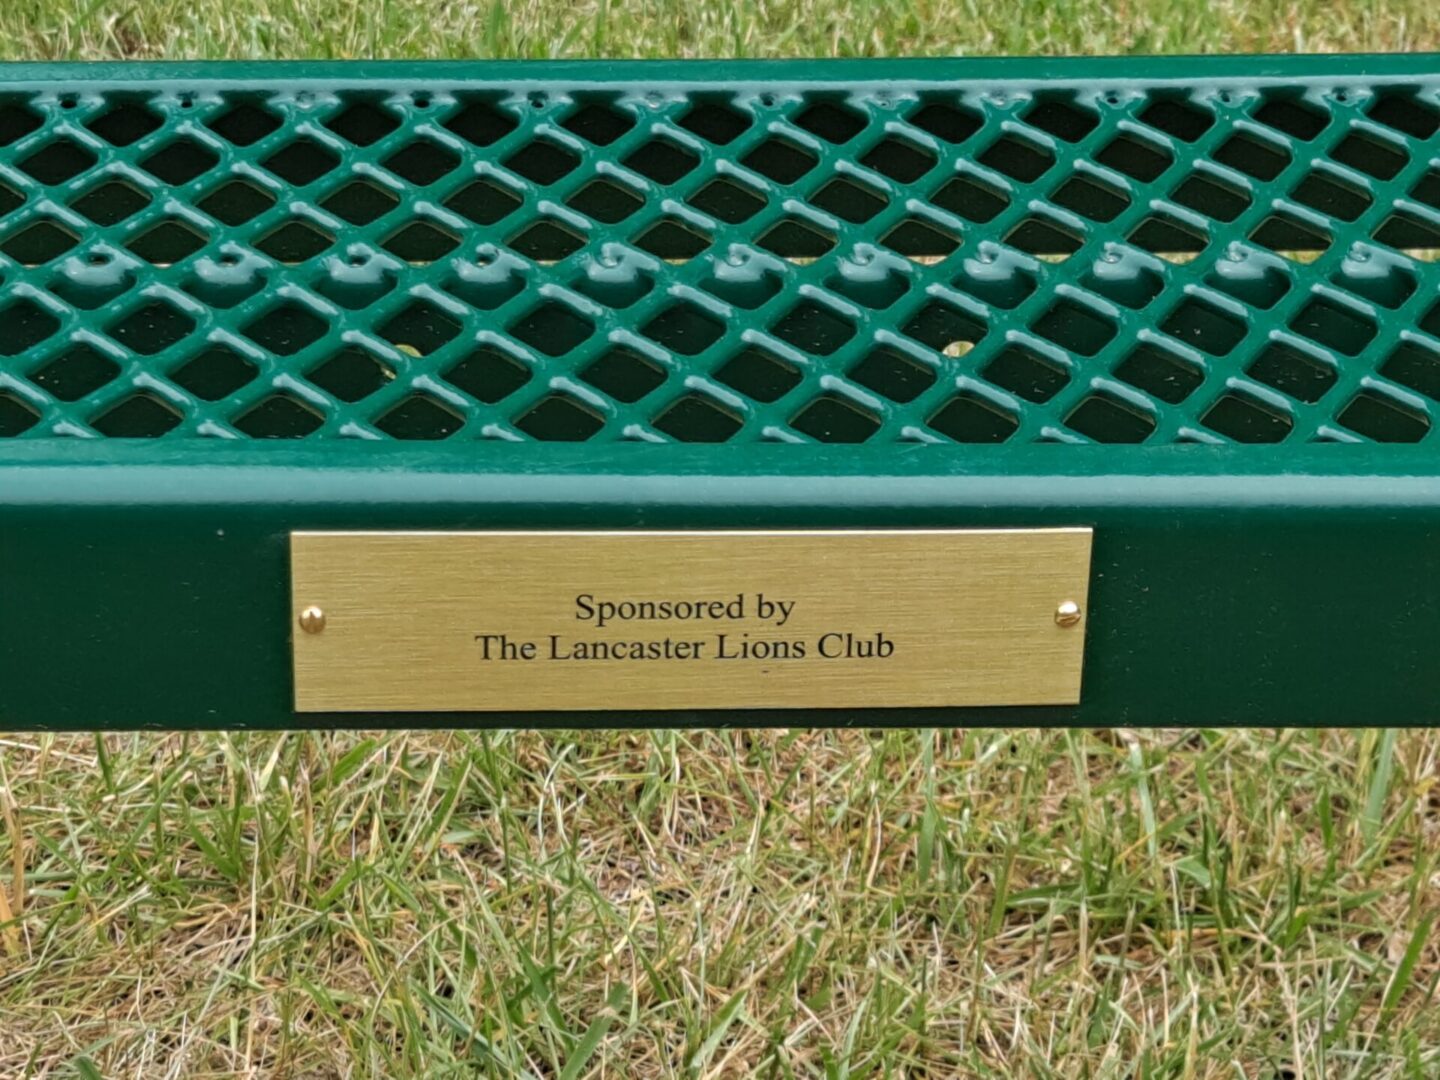 Sponsored by the lancaster lions club batch on the bench